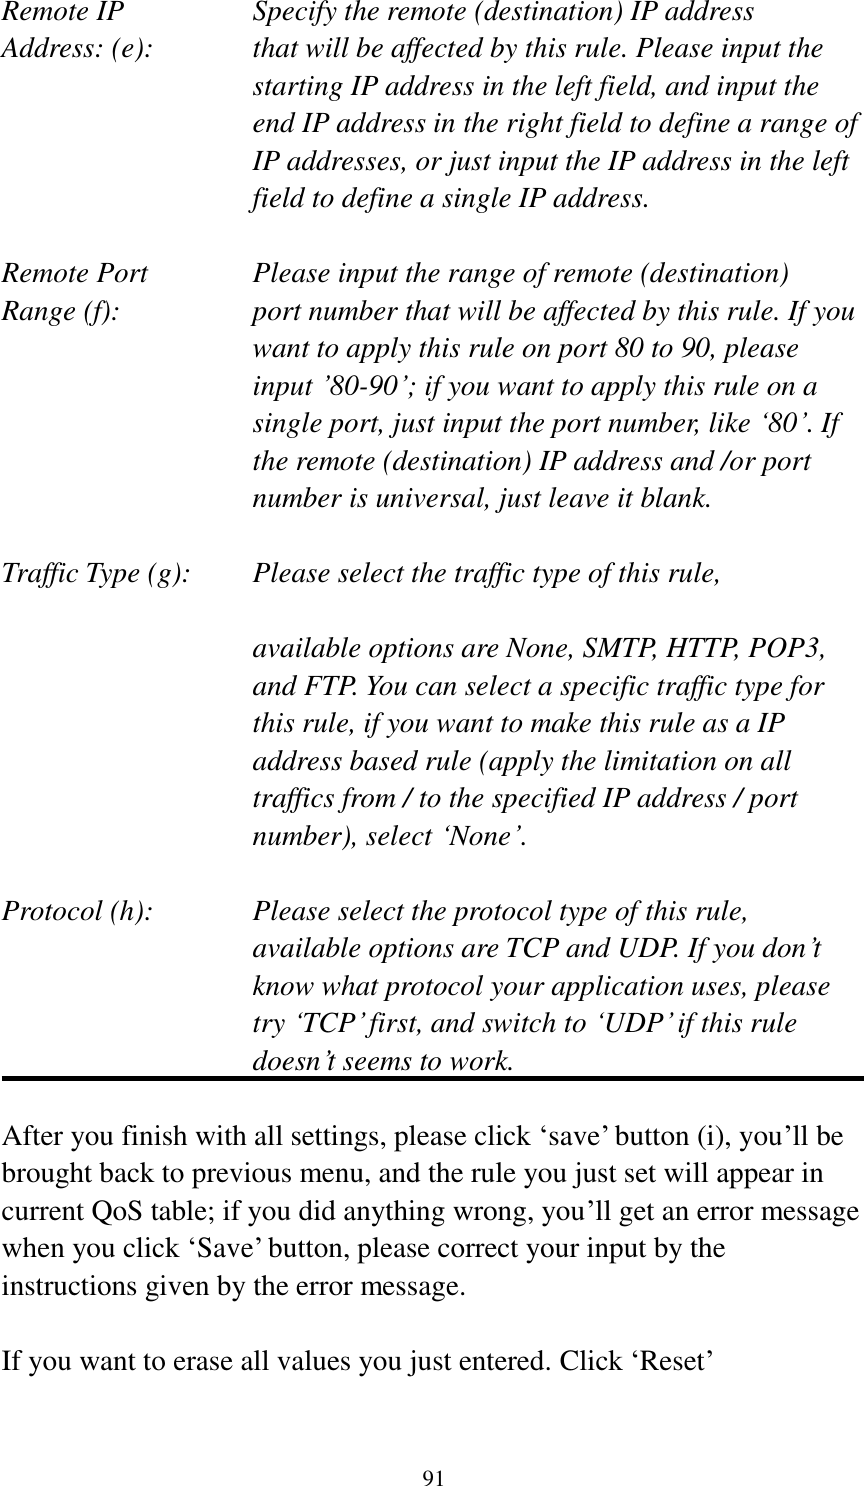 91 Remote IP        Specify the remote (destination) IP address Address: (e):    that will be affected by this rule. Please input the starting IP address in the left field, and input the end IP address in the right field to define a range of IP addresses, or just input the IP address in the left field to define a single IP address.  Remote Port      Please input the range of remote (destination) Range (f):  port number that will be affected by this rule. If you want to apply this rule on port 80 to 90, please input ‟80-90‟; if you want to apply this rule on a single port, just input the port number, like „80‟. If the remote (destination) IP address and /or port number is universal, just leave it blank.  Traffic Type (g):    Please select the traffic type of this rule,  available options are None, SMTP, HTTP, POP3, and FTP. You can select a specific traffic type for this rule, if you want to make this rule as a IP address based rule (apply the limitation on all traffics from / to the specified IP address / port number), select „None‟.  Protocol (h):      Please select the protocol type of this rule,   available options are TCP and UDP. If you don‟t know what protocol your application uses, please try „TCP‟ first, and switch to „UDP‟ if this rule doesn‟t seems to work.  After you finish with all settings, please click „save‟ button (i), you‟ll be brought back to previous menu, and the rule you just set will appear in current QoS table; if you did anything wrong, you‟ll get an error message when you click „Save‟ button, please correct your input by the instructions given by the error message.  If you want to erase all values you just entered. Click „Reset‟ 